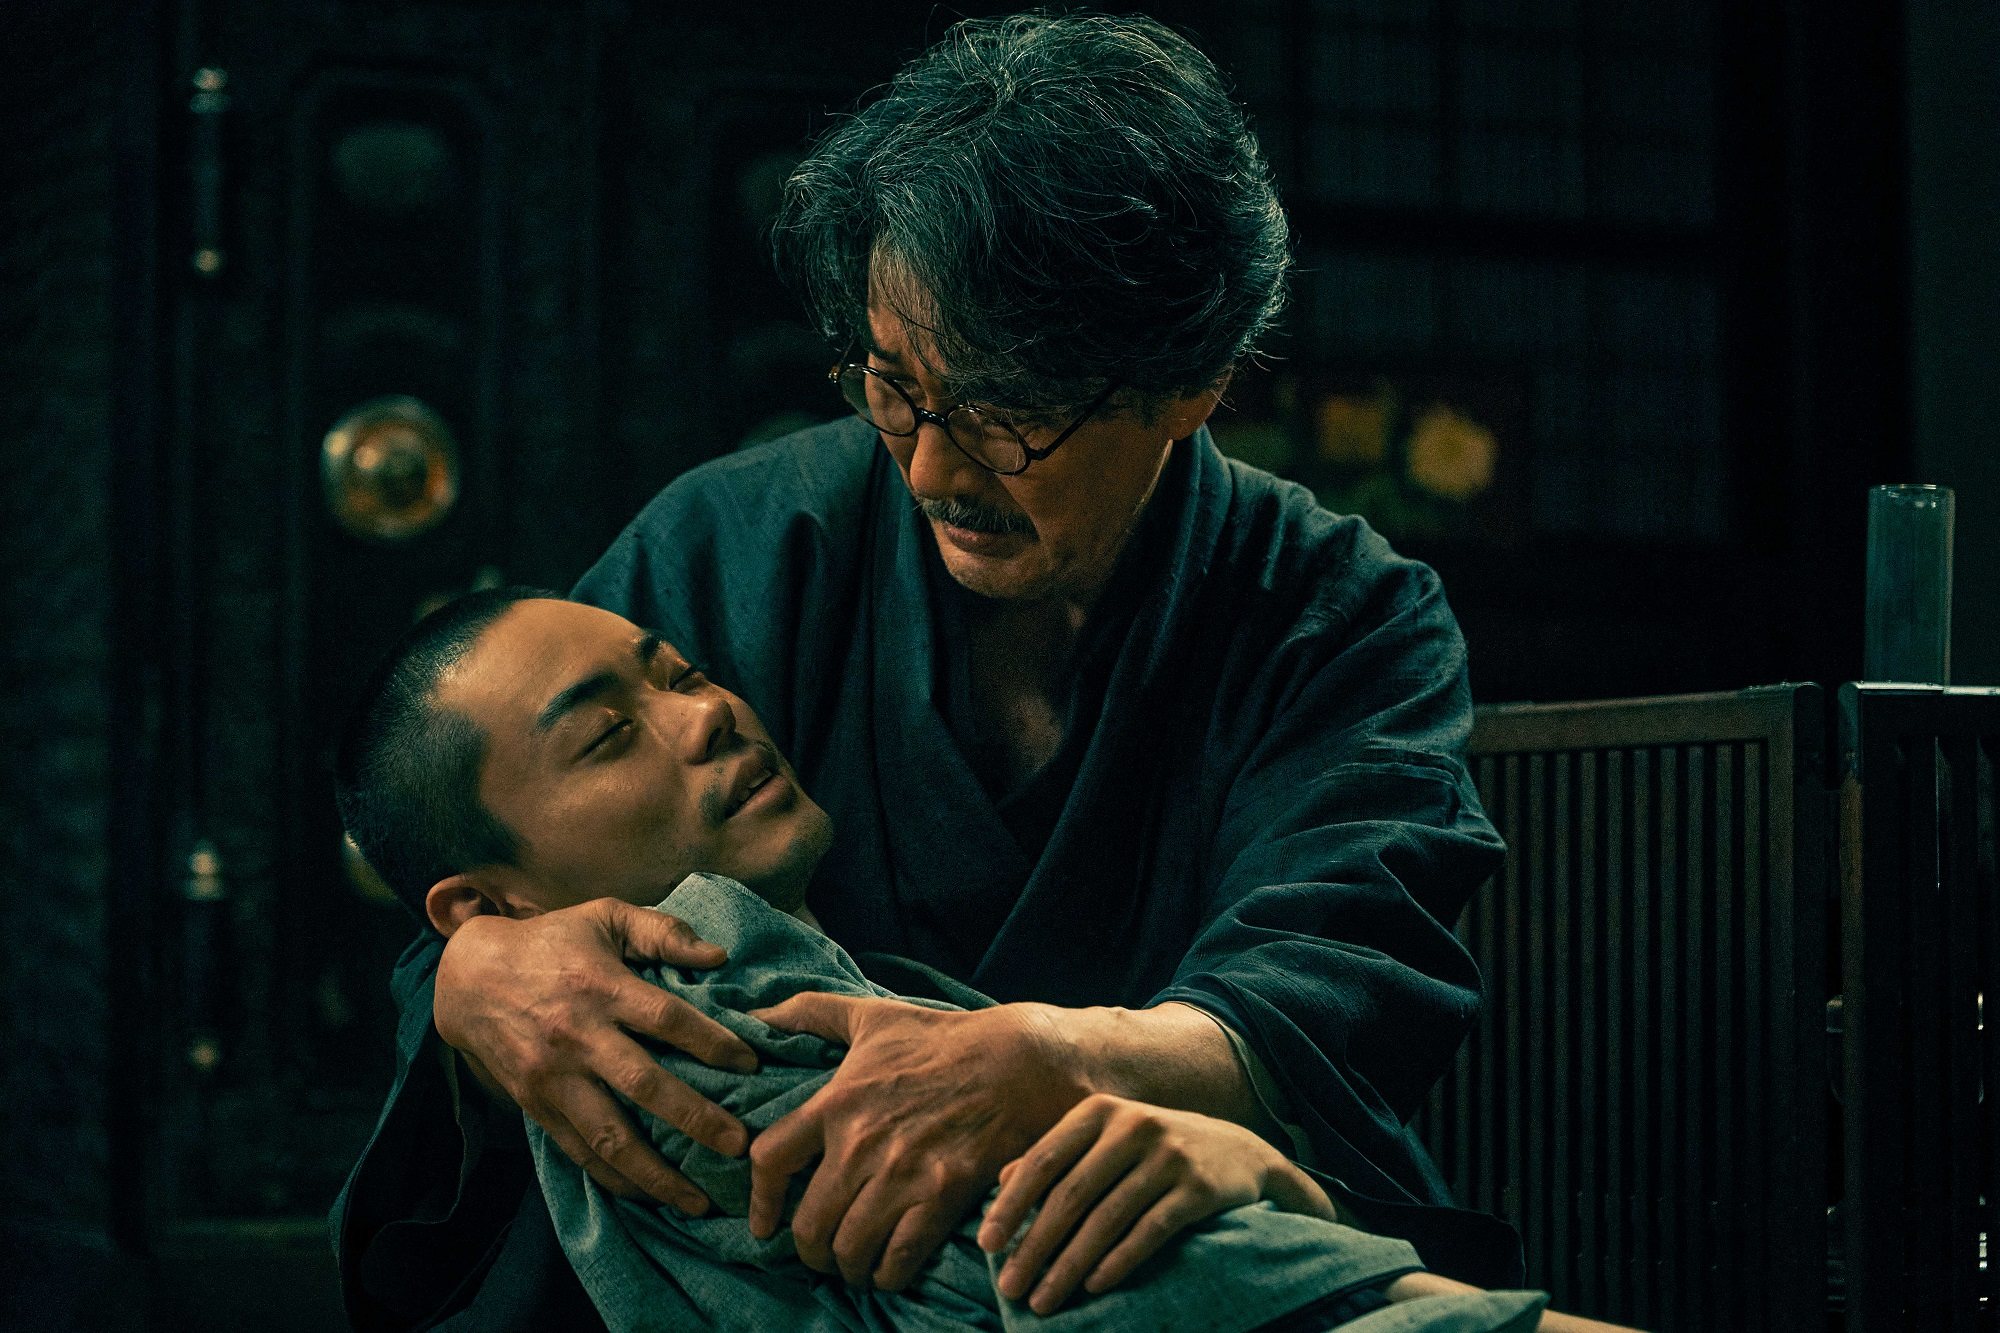 Koji Yakusho (top) and Masaki Suda in a still from “Father of the Milky Way Railroad”.